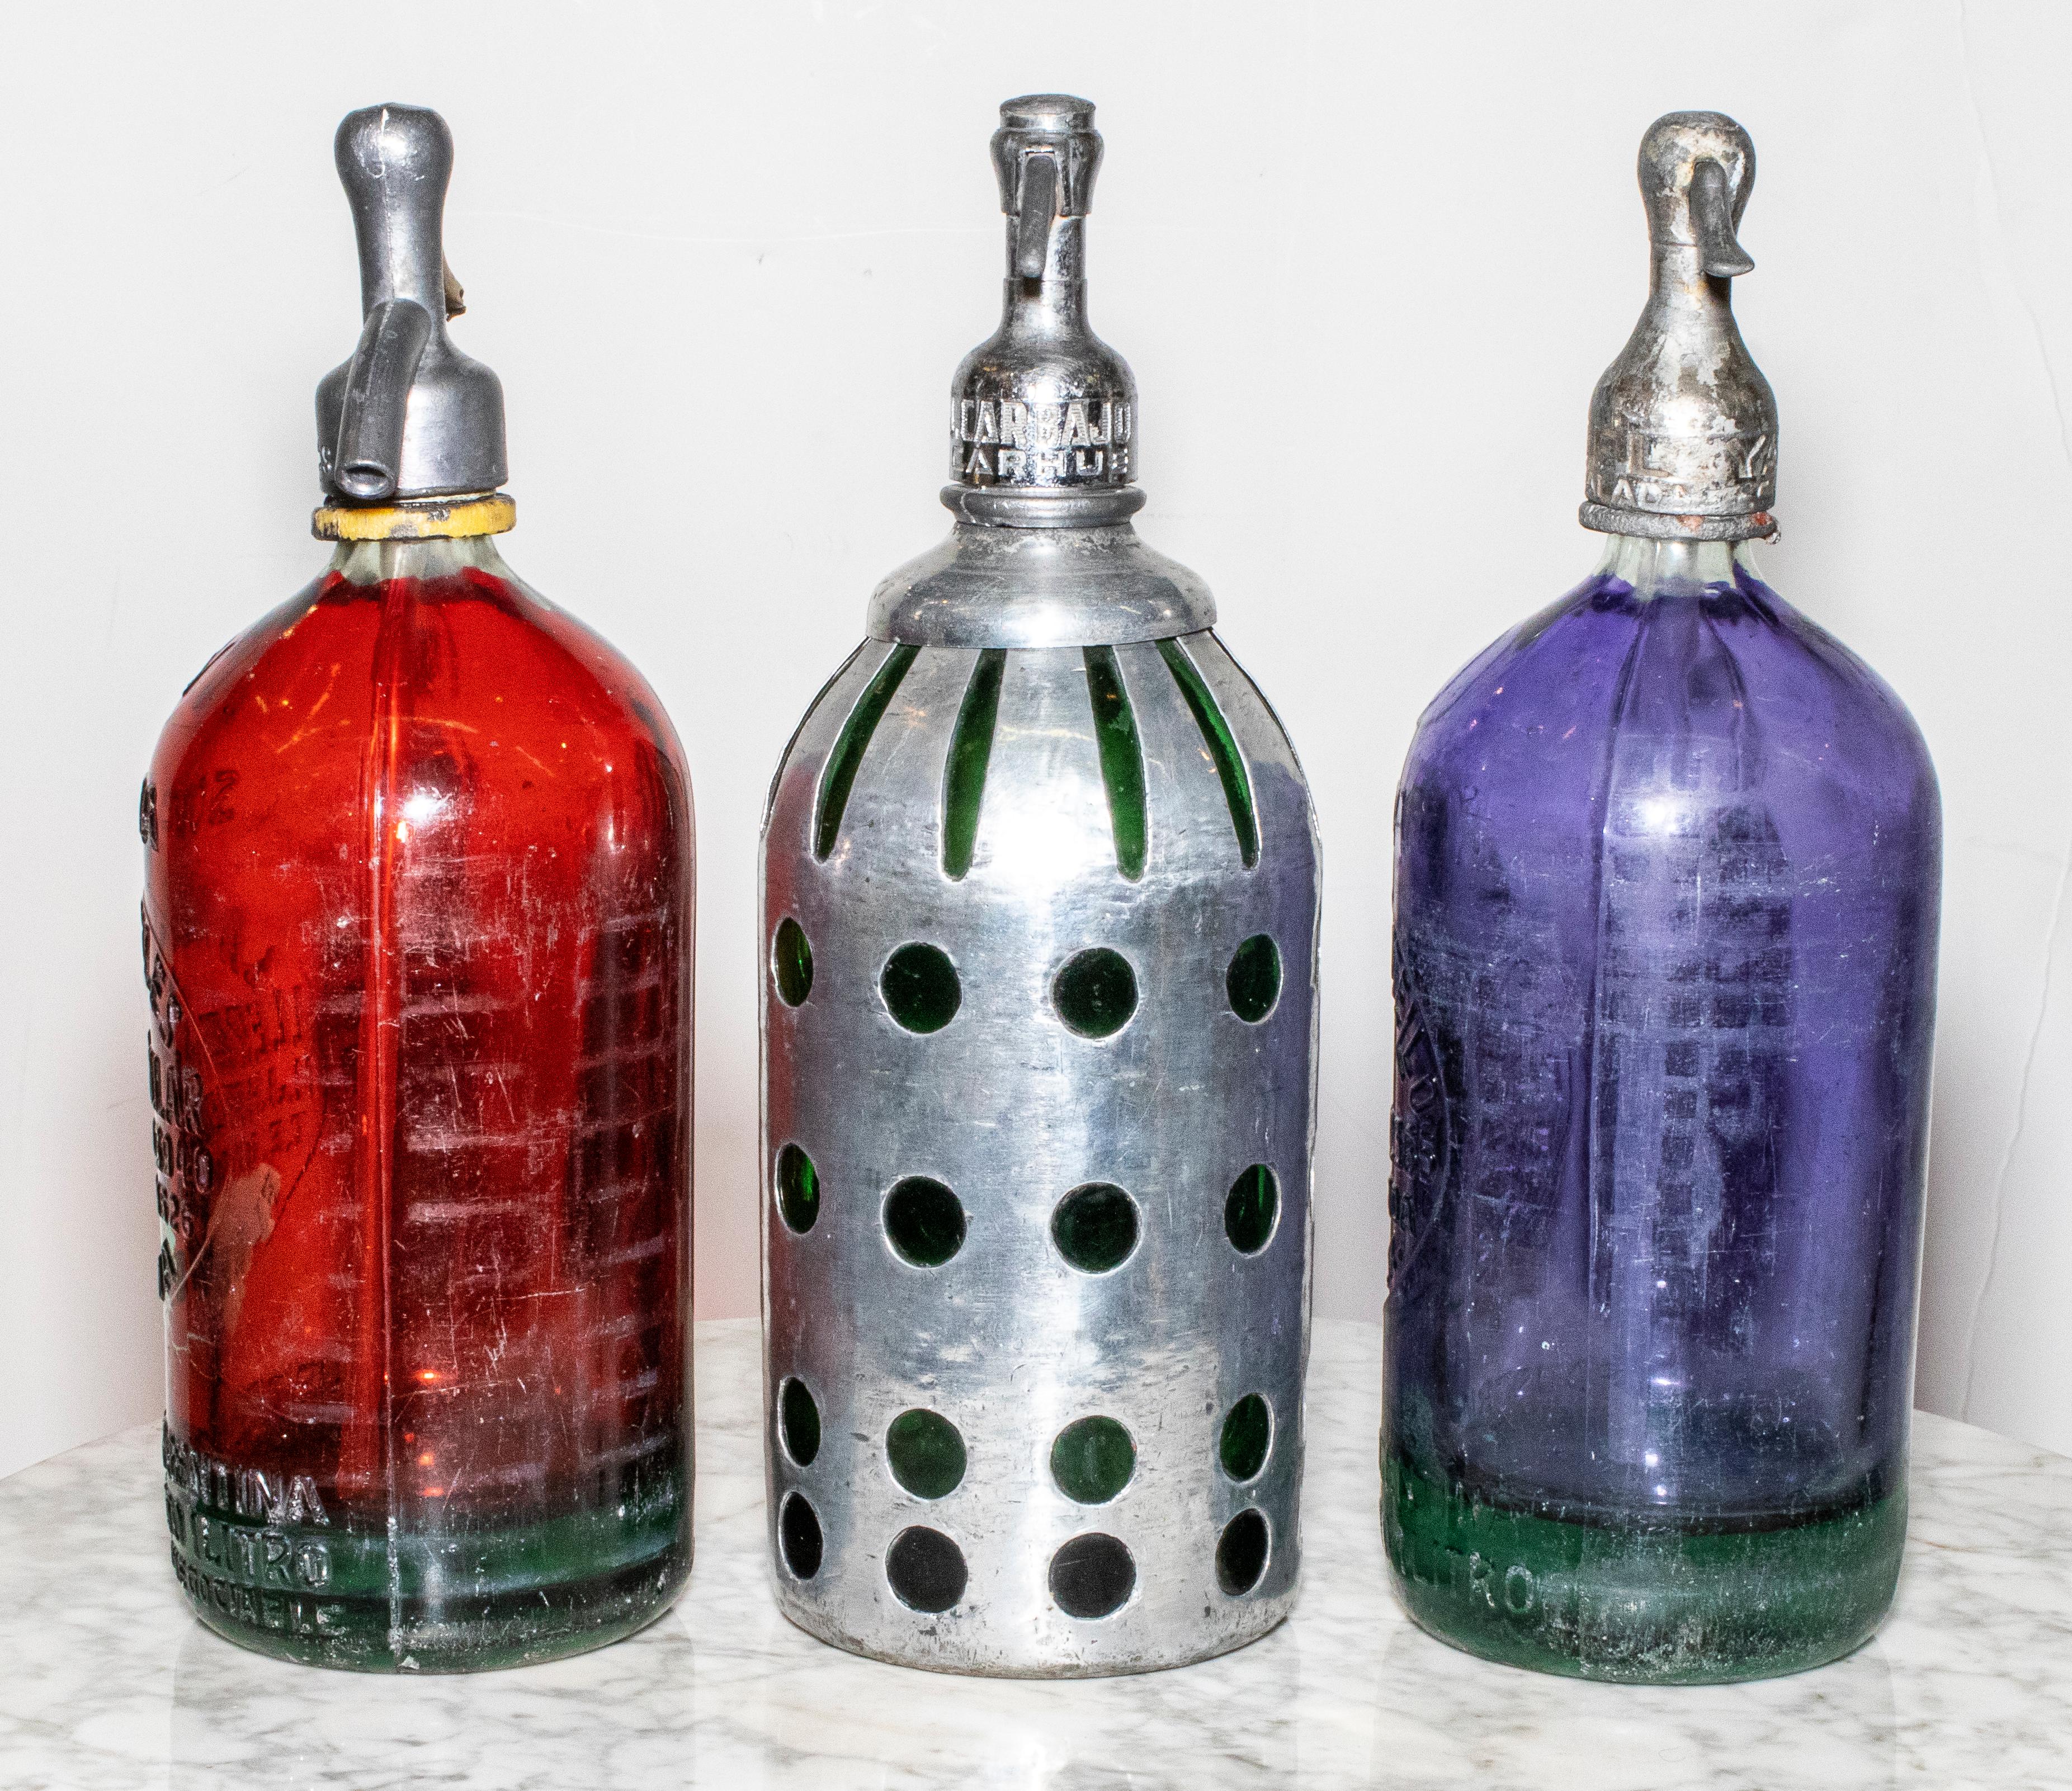 Set of 3 Argentina Art Deco seltzer bottles. Rare colors including red, purple, and green with chrome cover.